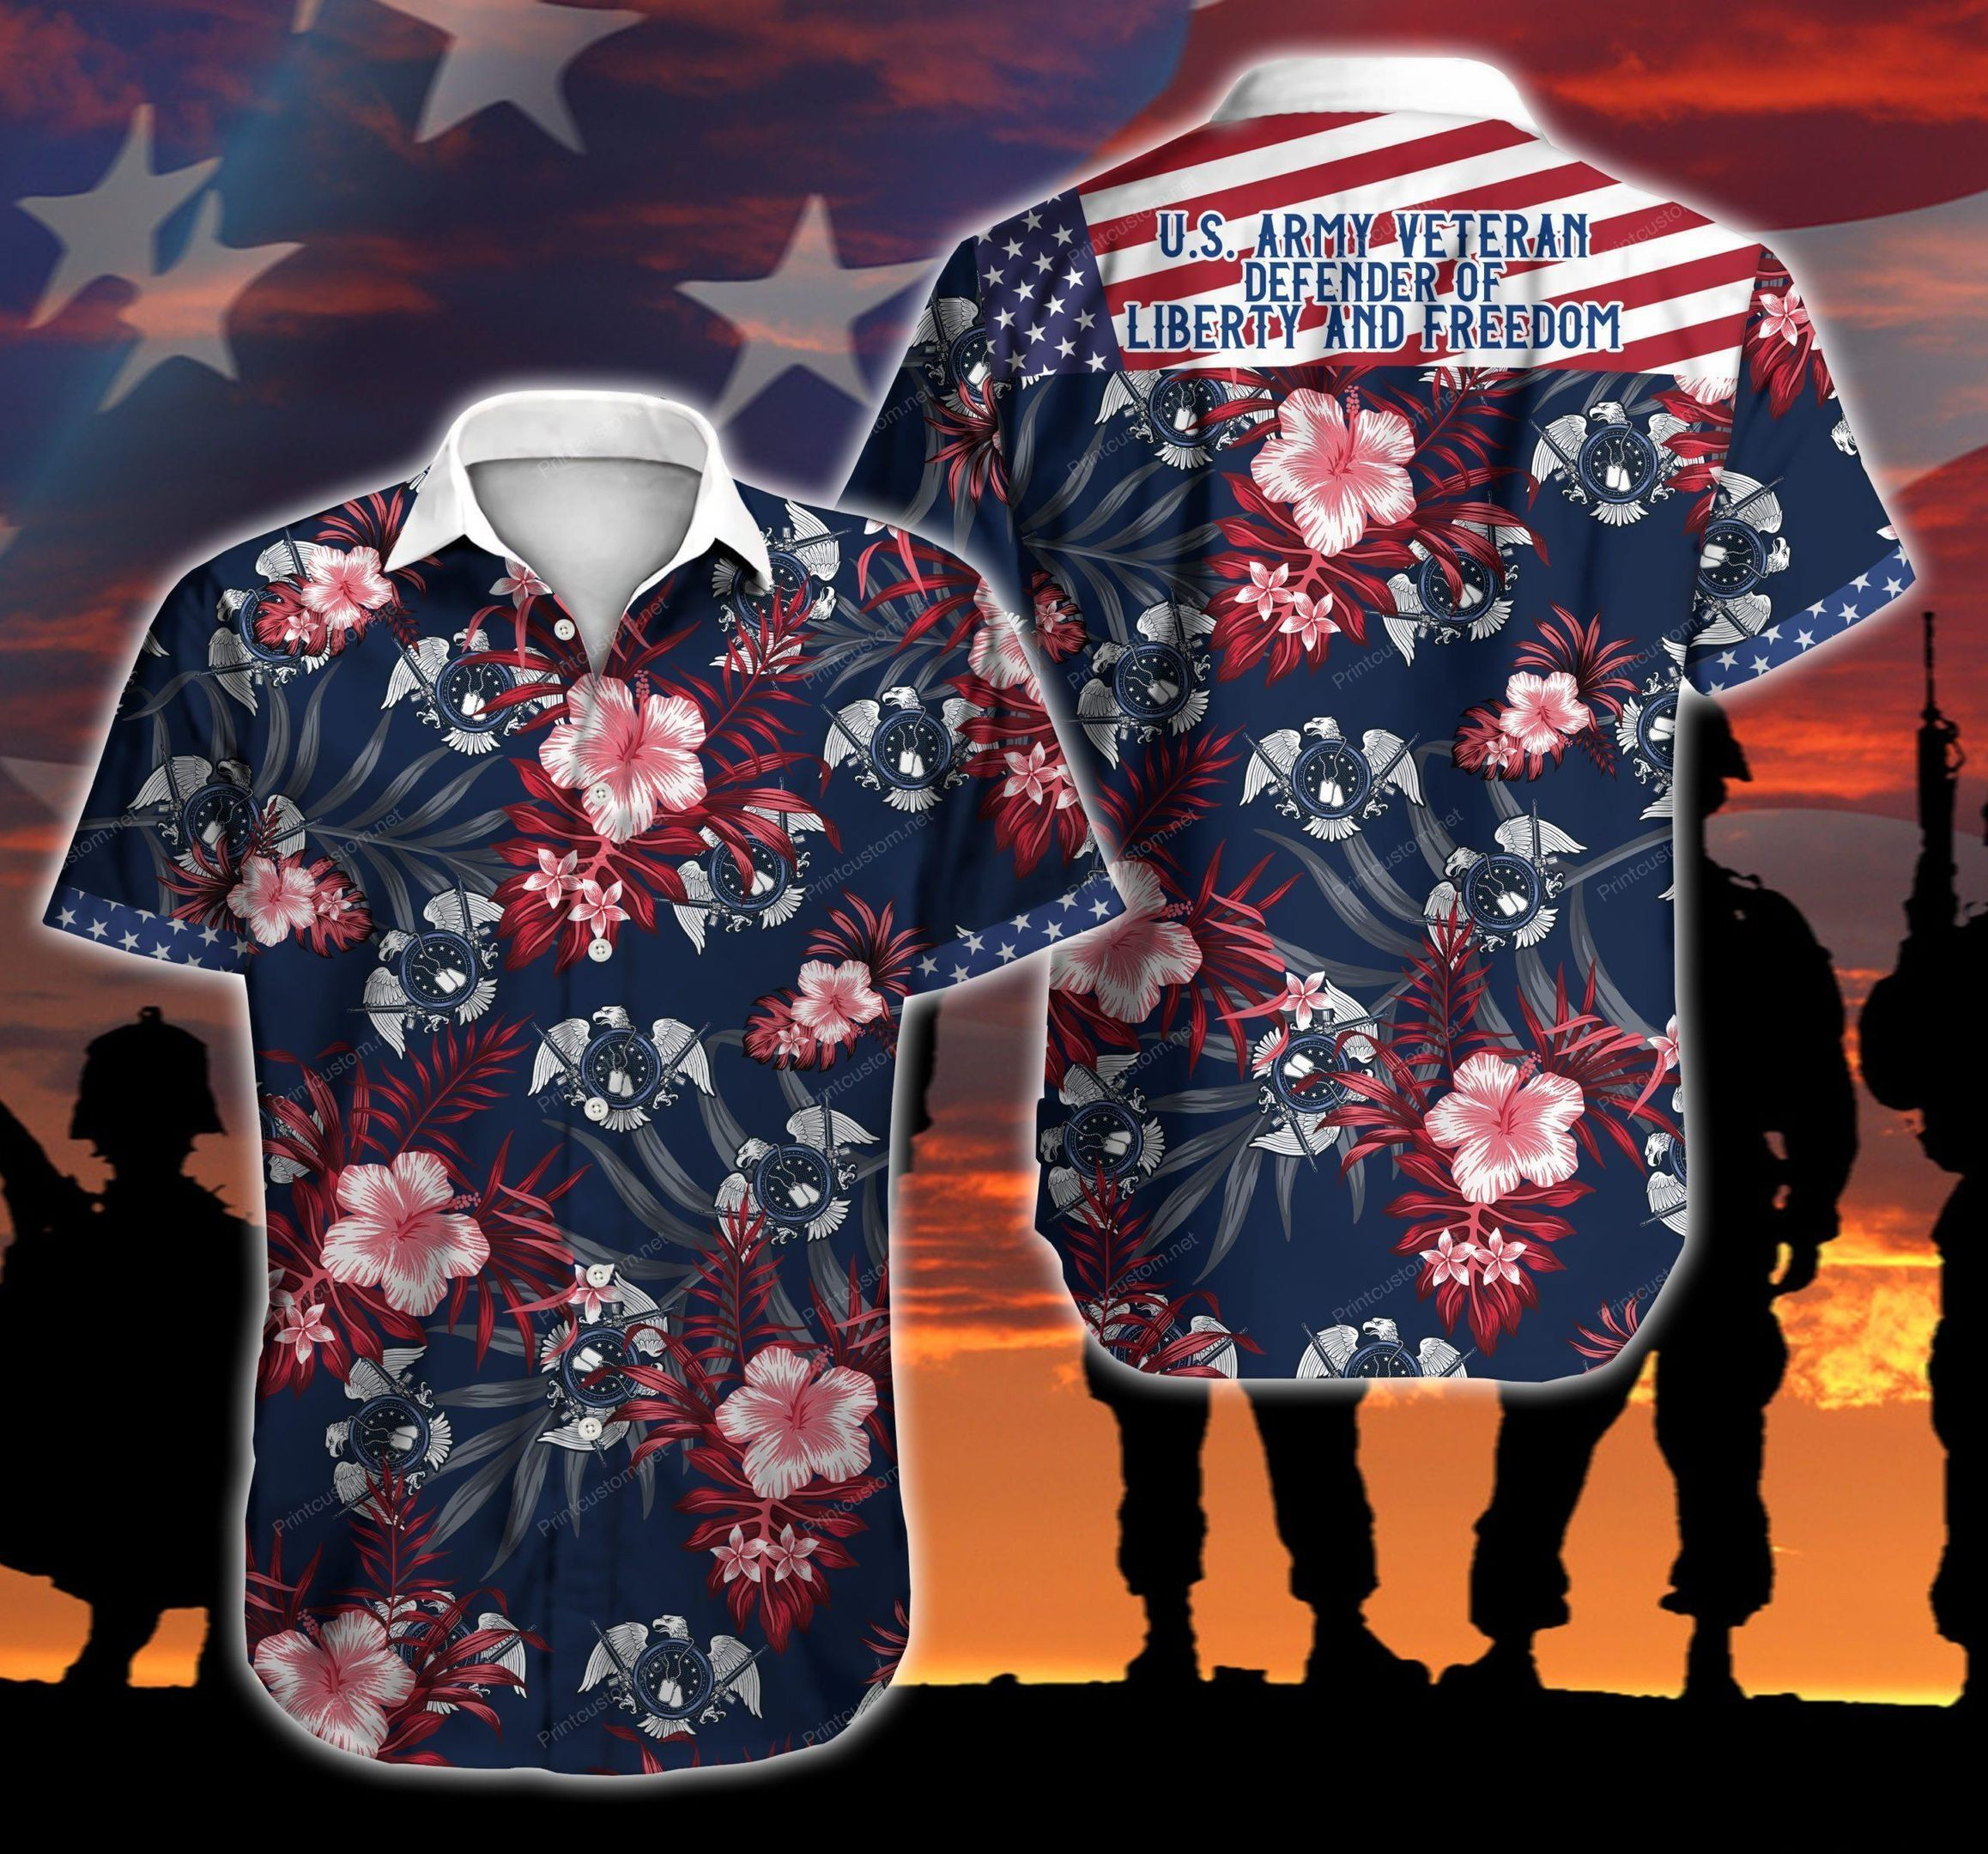 Choose from the many styles and colors to find your favorite Hawaiian Shirt below 223